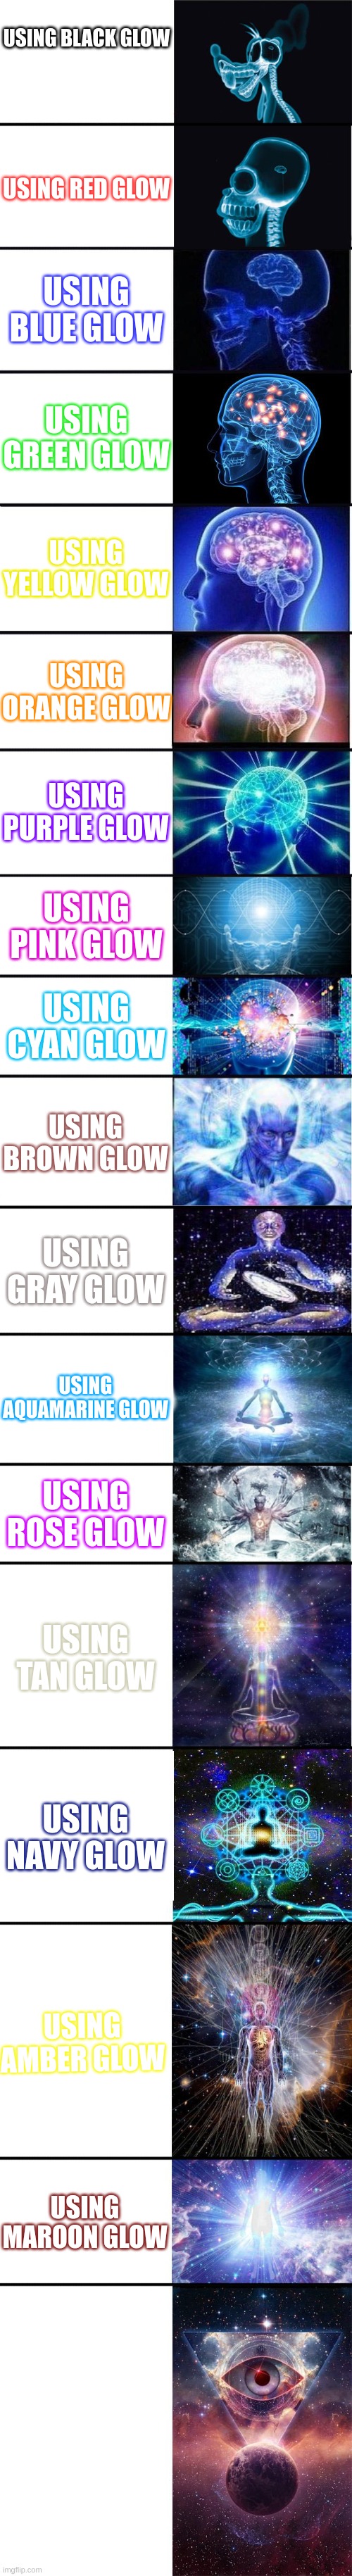 G L O W | USING BLACK GLOW; USING RED GLOW; USING BLUE GLOW; USING GREEN GLOW; USING YELLOW GLOW; USING ORANGE GLOW; USING PURPLE GLOW; USING PINK GLOW; USING CYAN GLOW; USING BROWN GLOW; USING GRAY GLOW; USING AQUAMARINE GLOW; USING ROSE GLOW; USING TAN GLOW; USING NAVY GLOW; USING AMBER GLOW; USING MAROON GLOW | image tagged in expanding brain 9001,text,glow | made w/ Imgflip meme maker